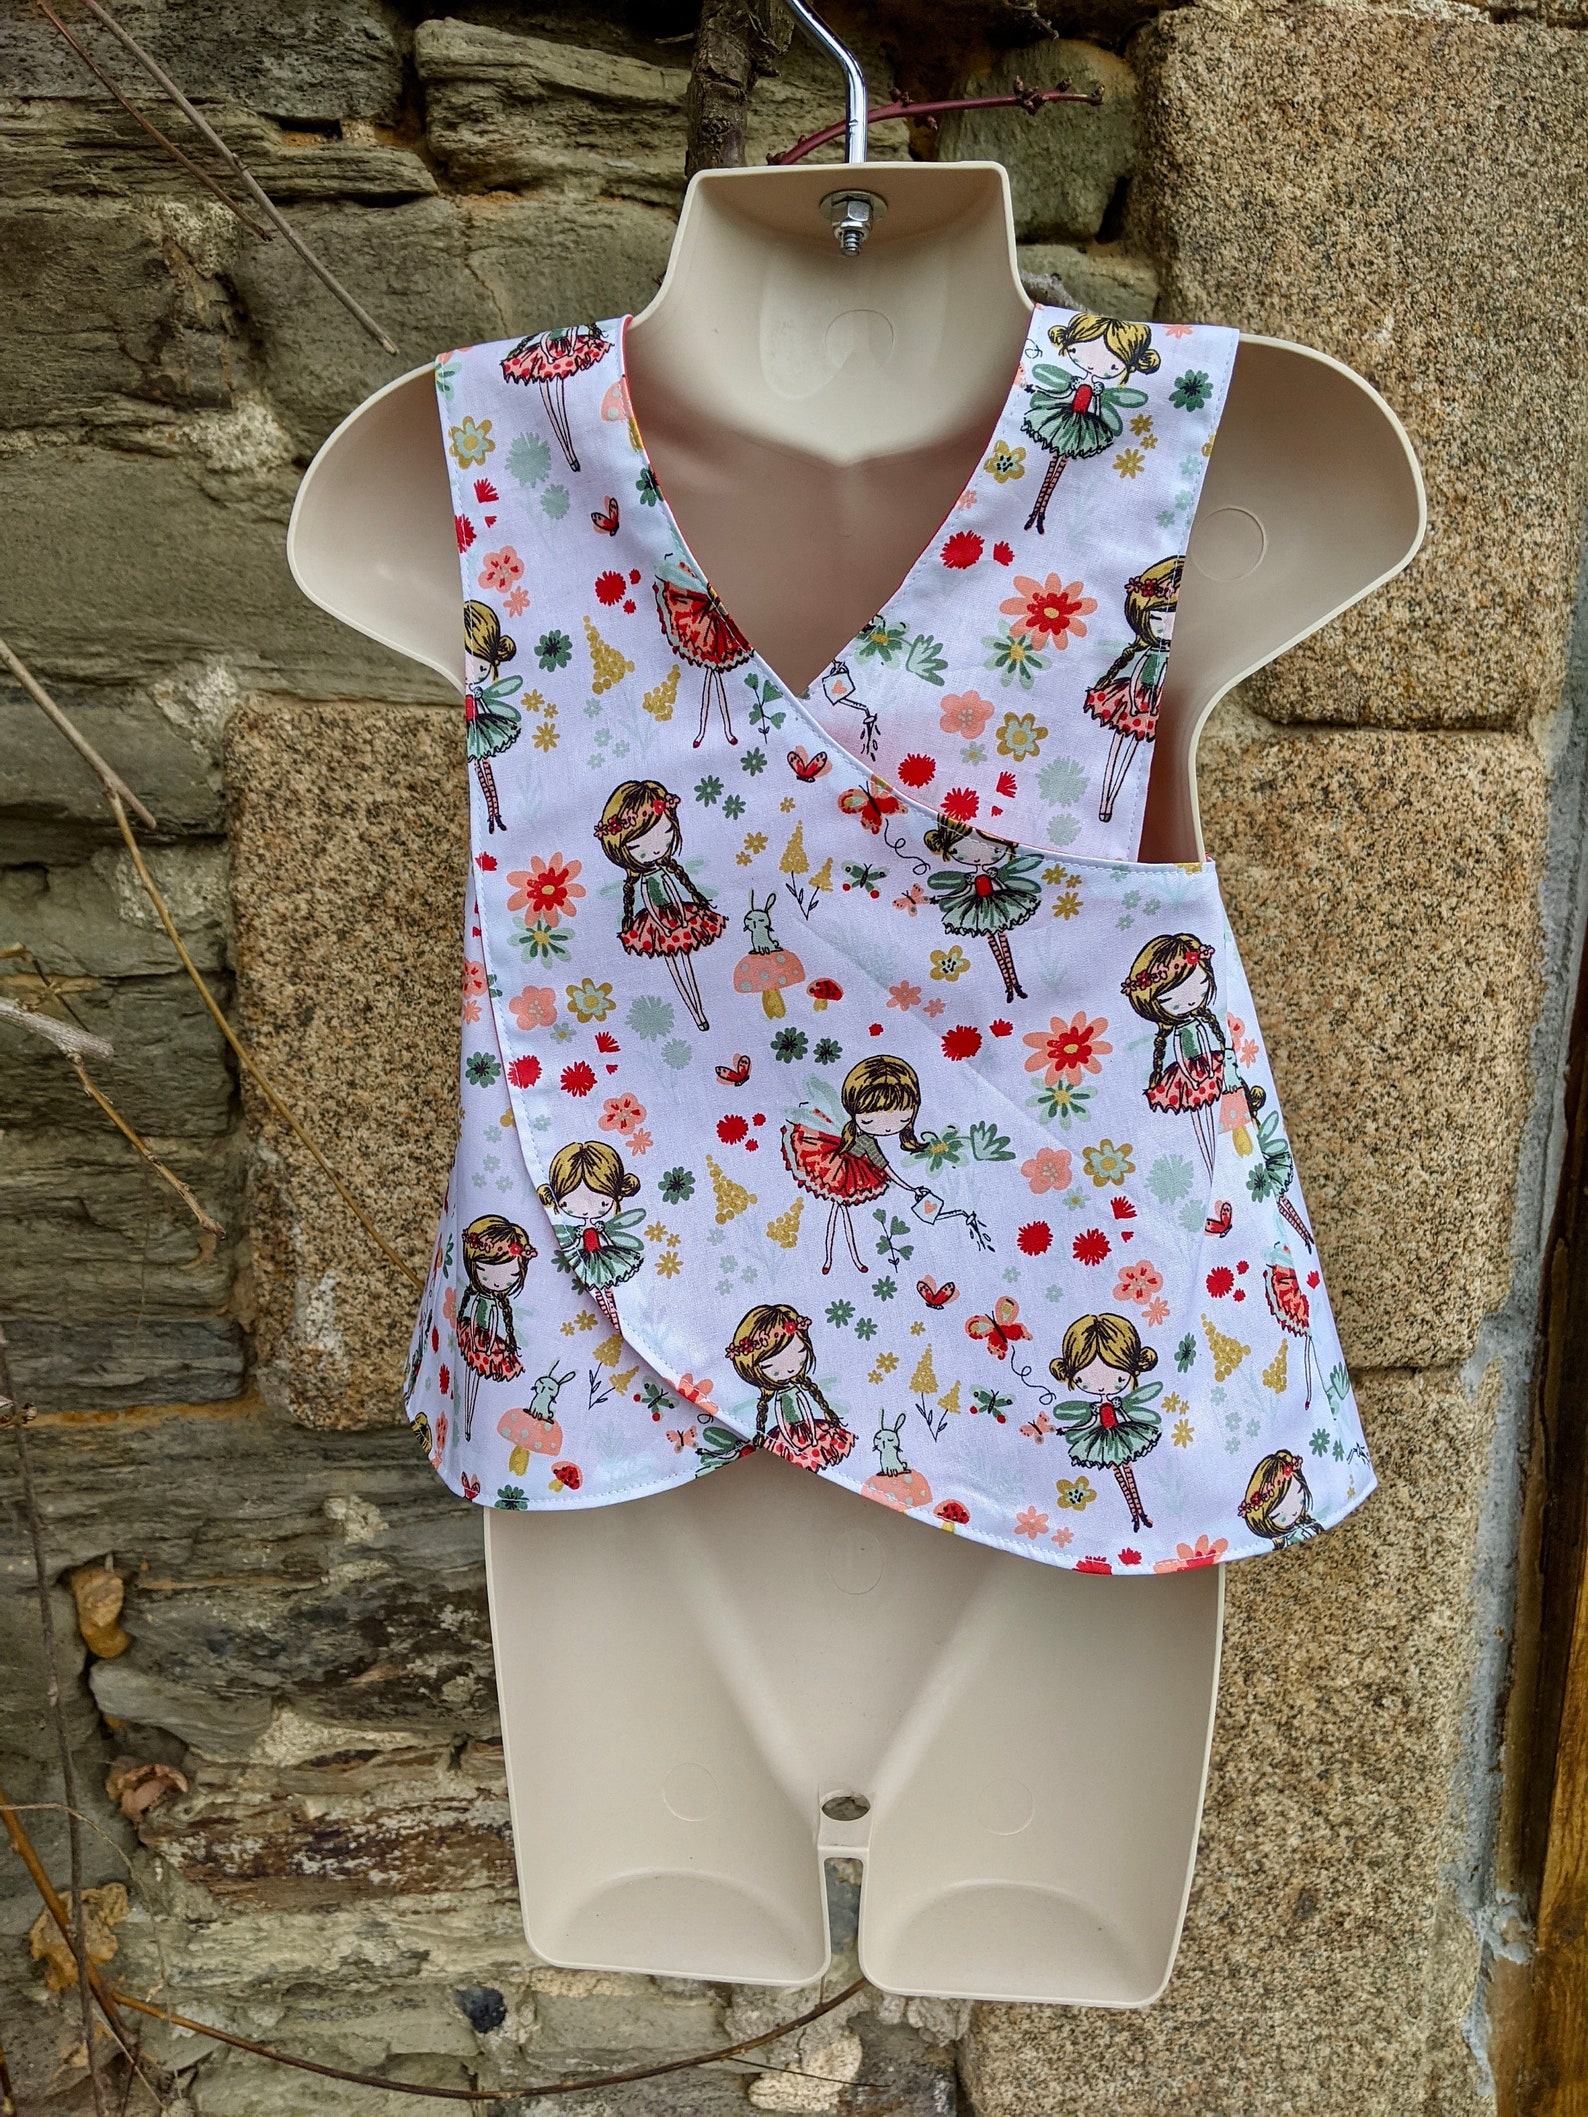 A Home Made Pretty Wrap Around Baby Dress Apron Style With - Etsy